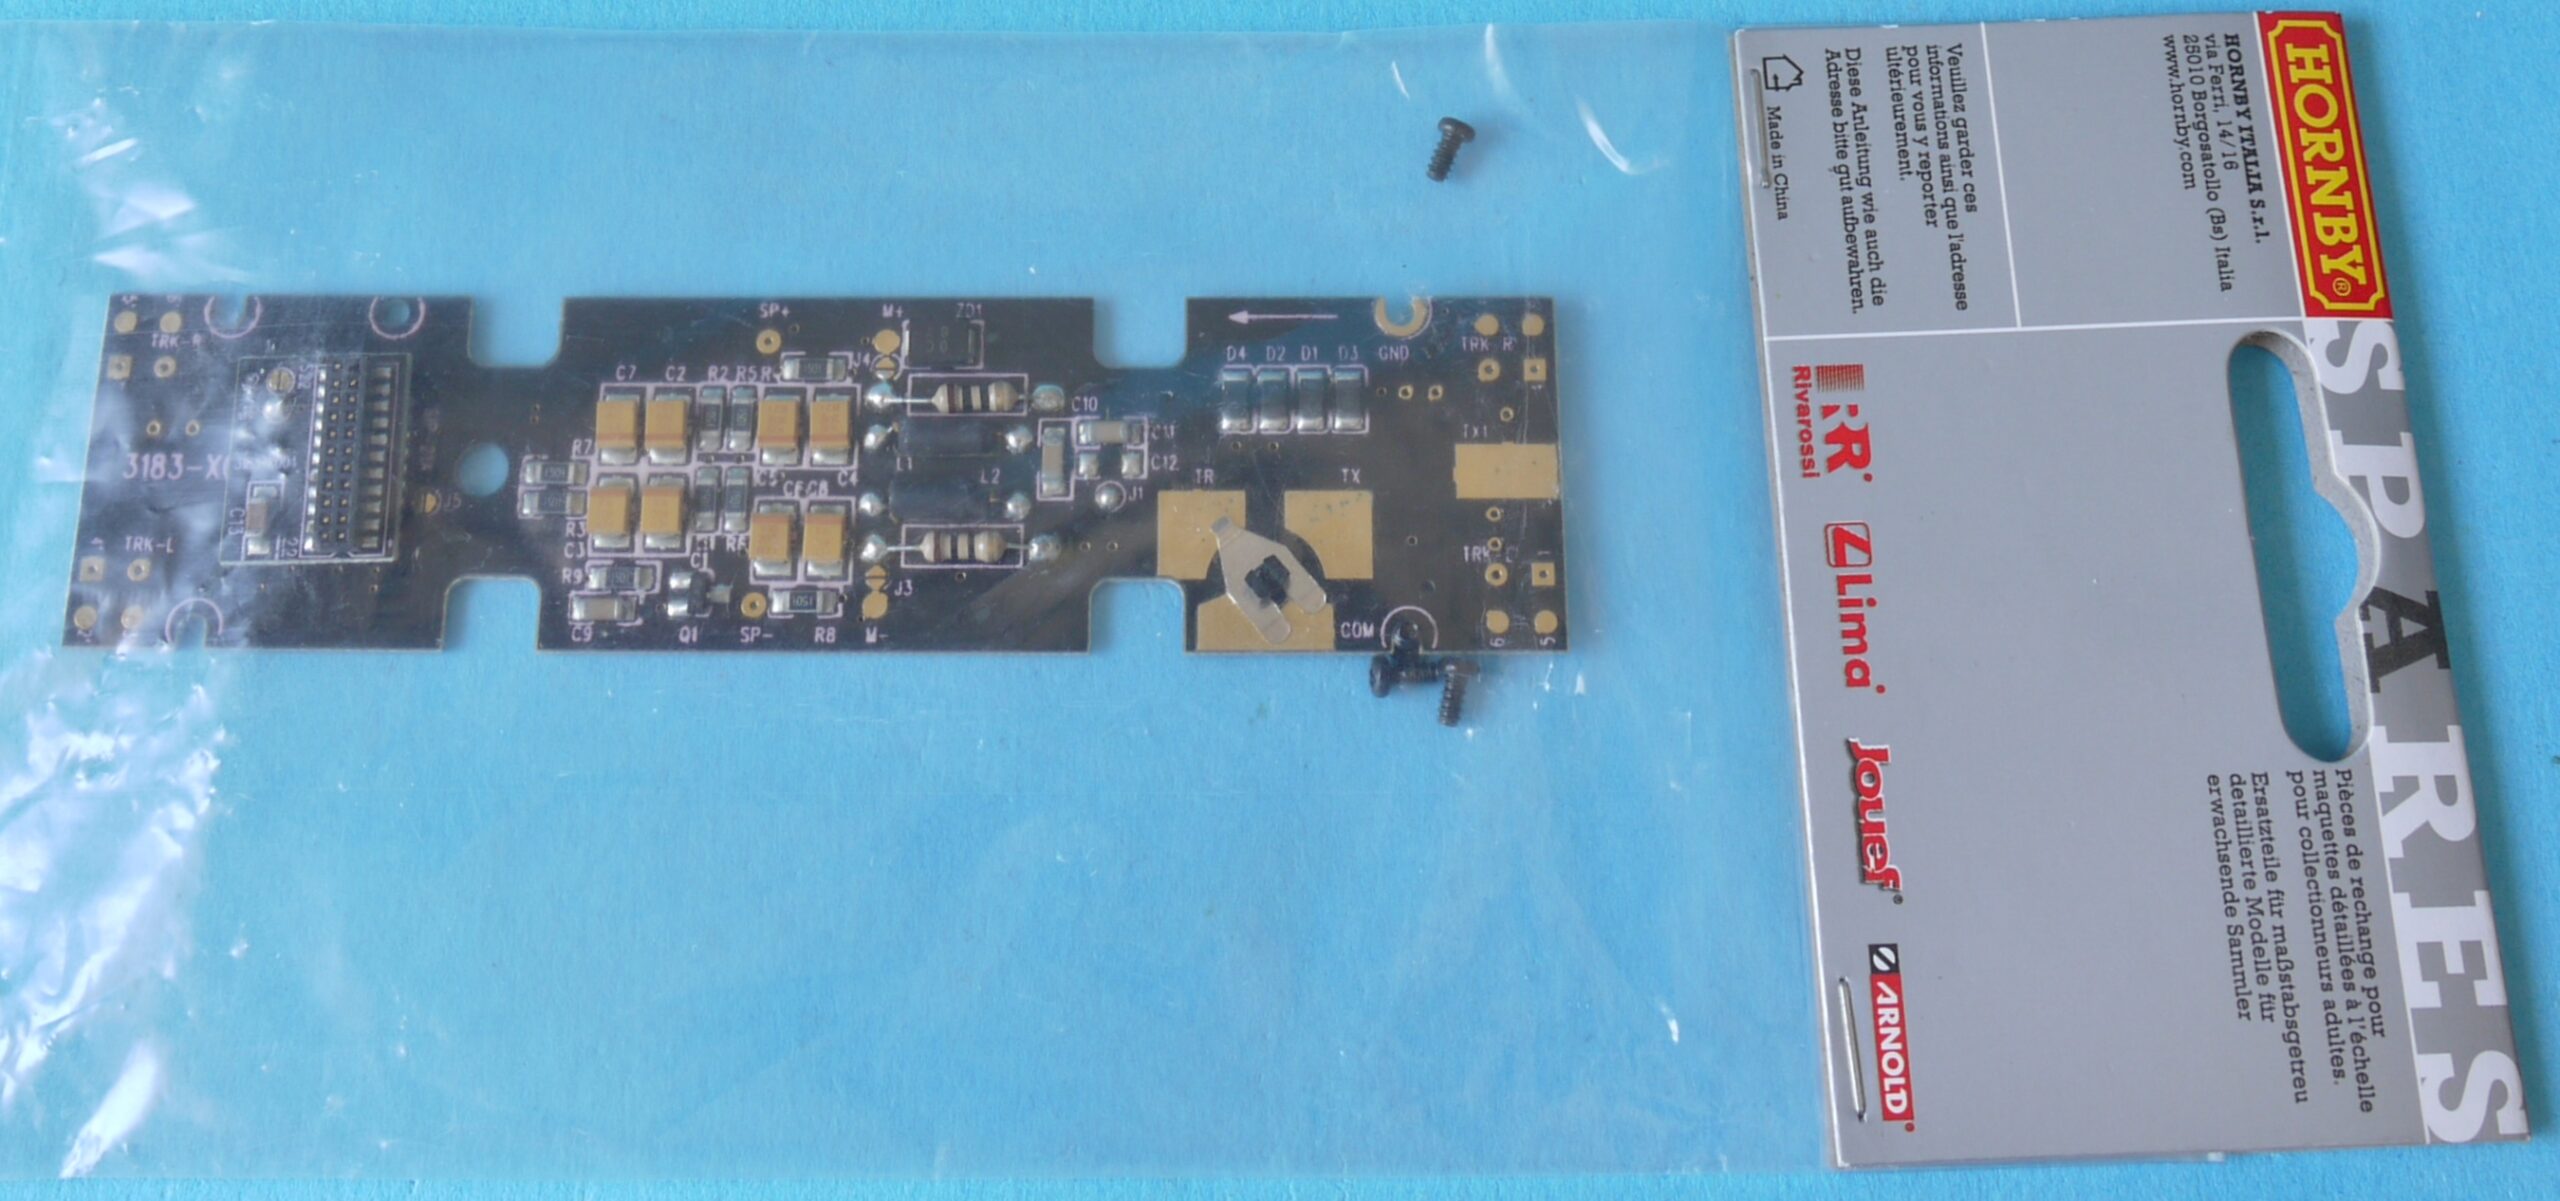 HR2059/7 Hornby Rivarossi PCB for "Grenchen" BLS R2 4/4 AC-Digital IS14.8